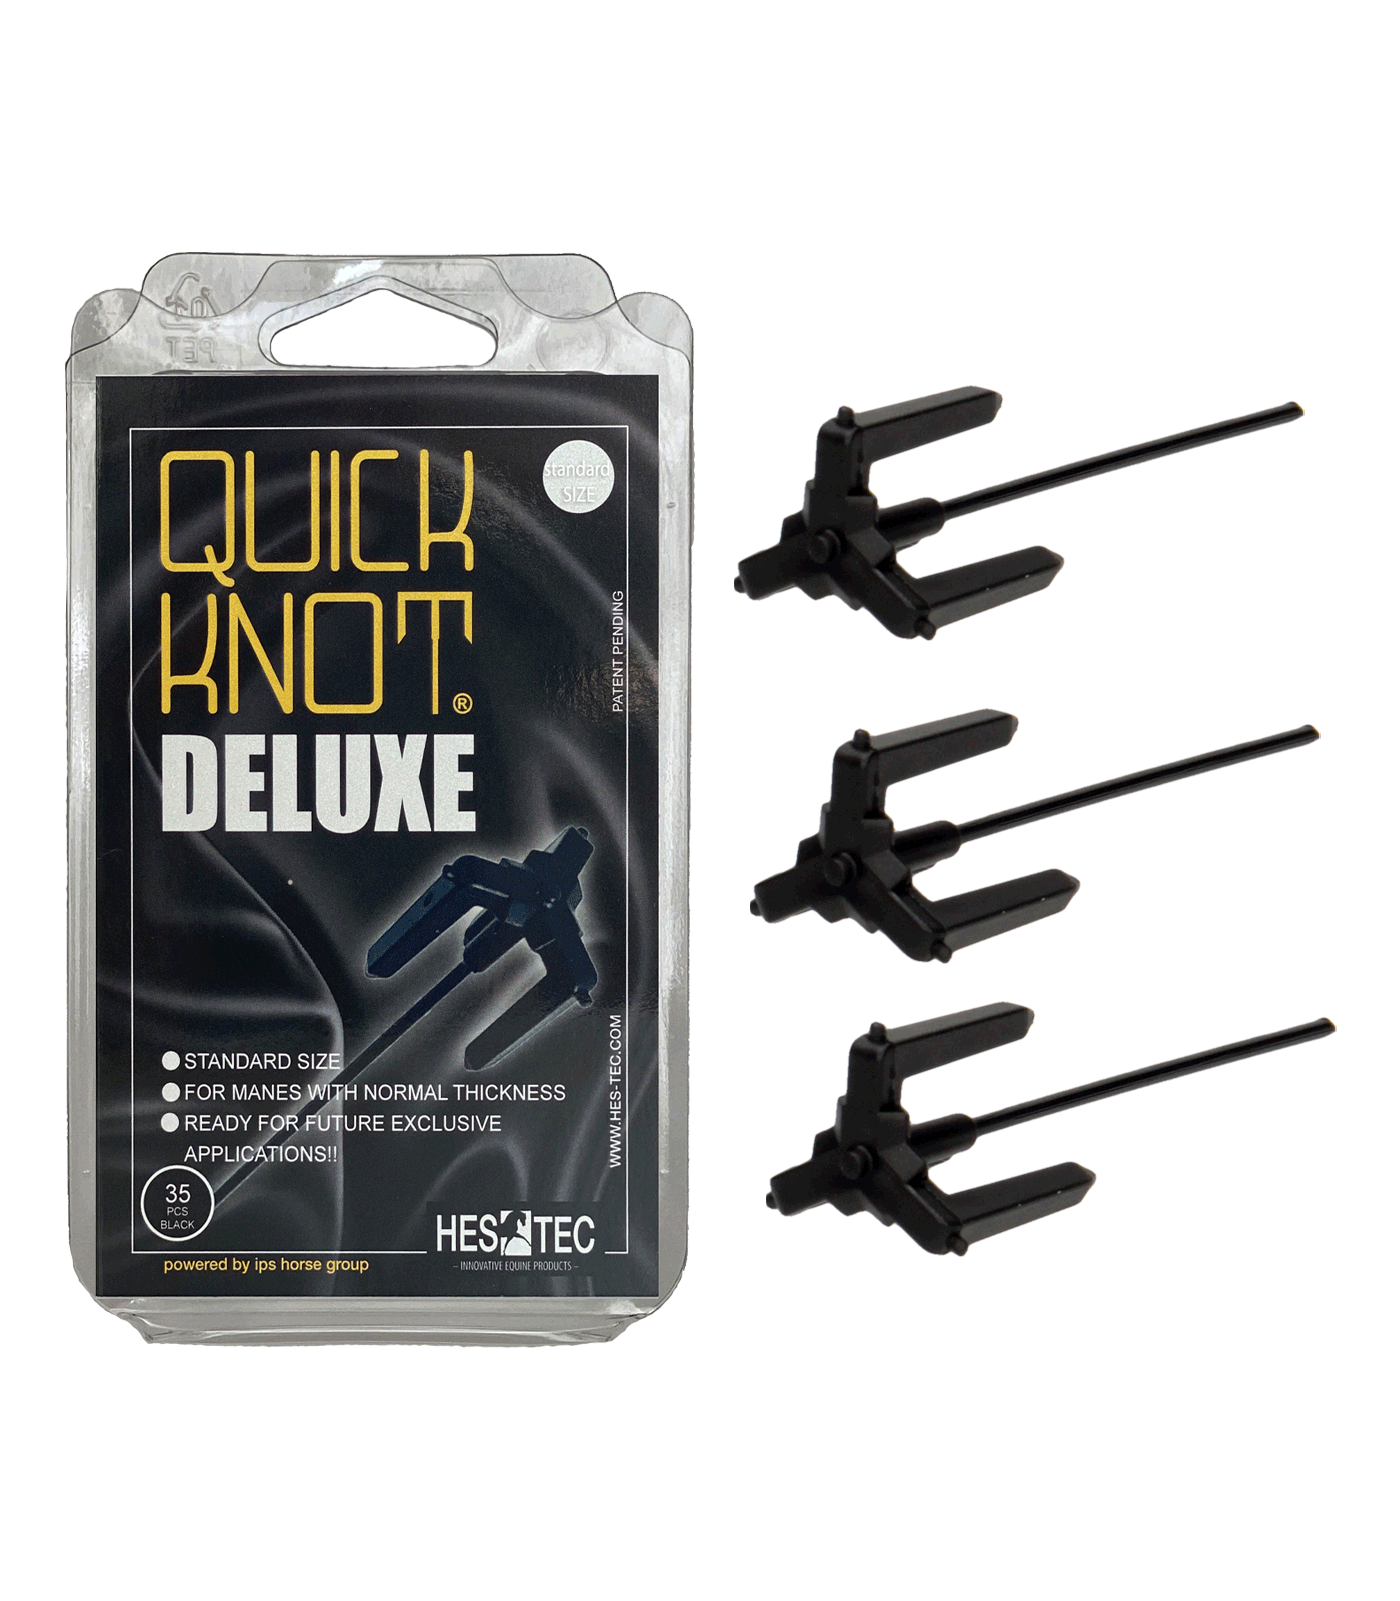 Quick Knot Deluxe Plaiting Aid, standard black